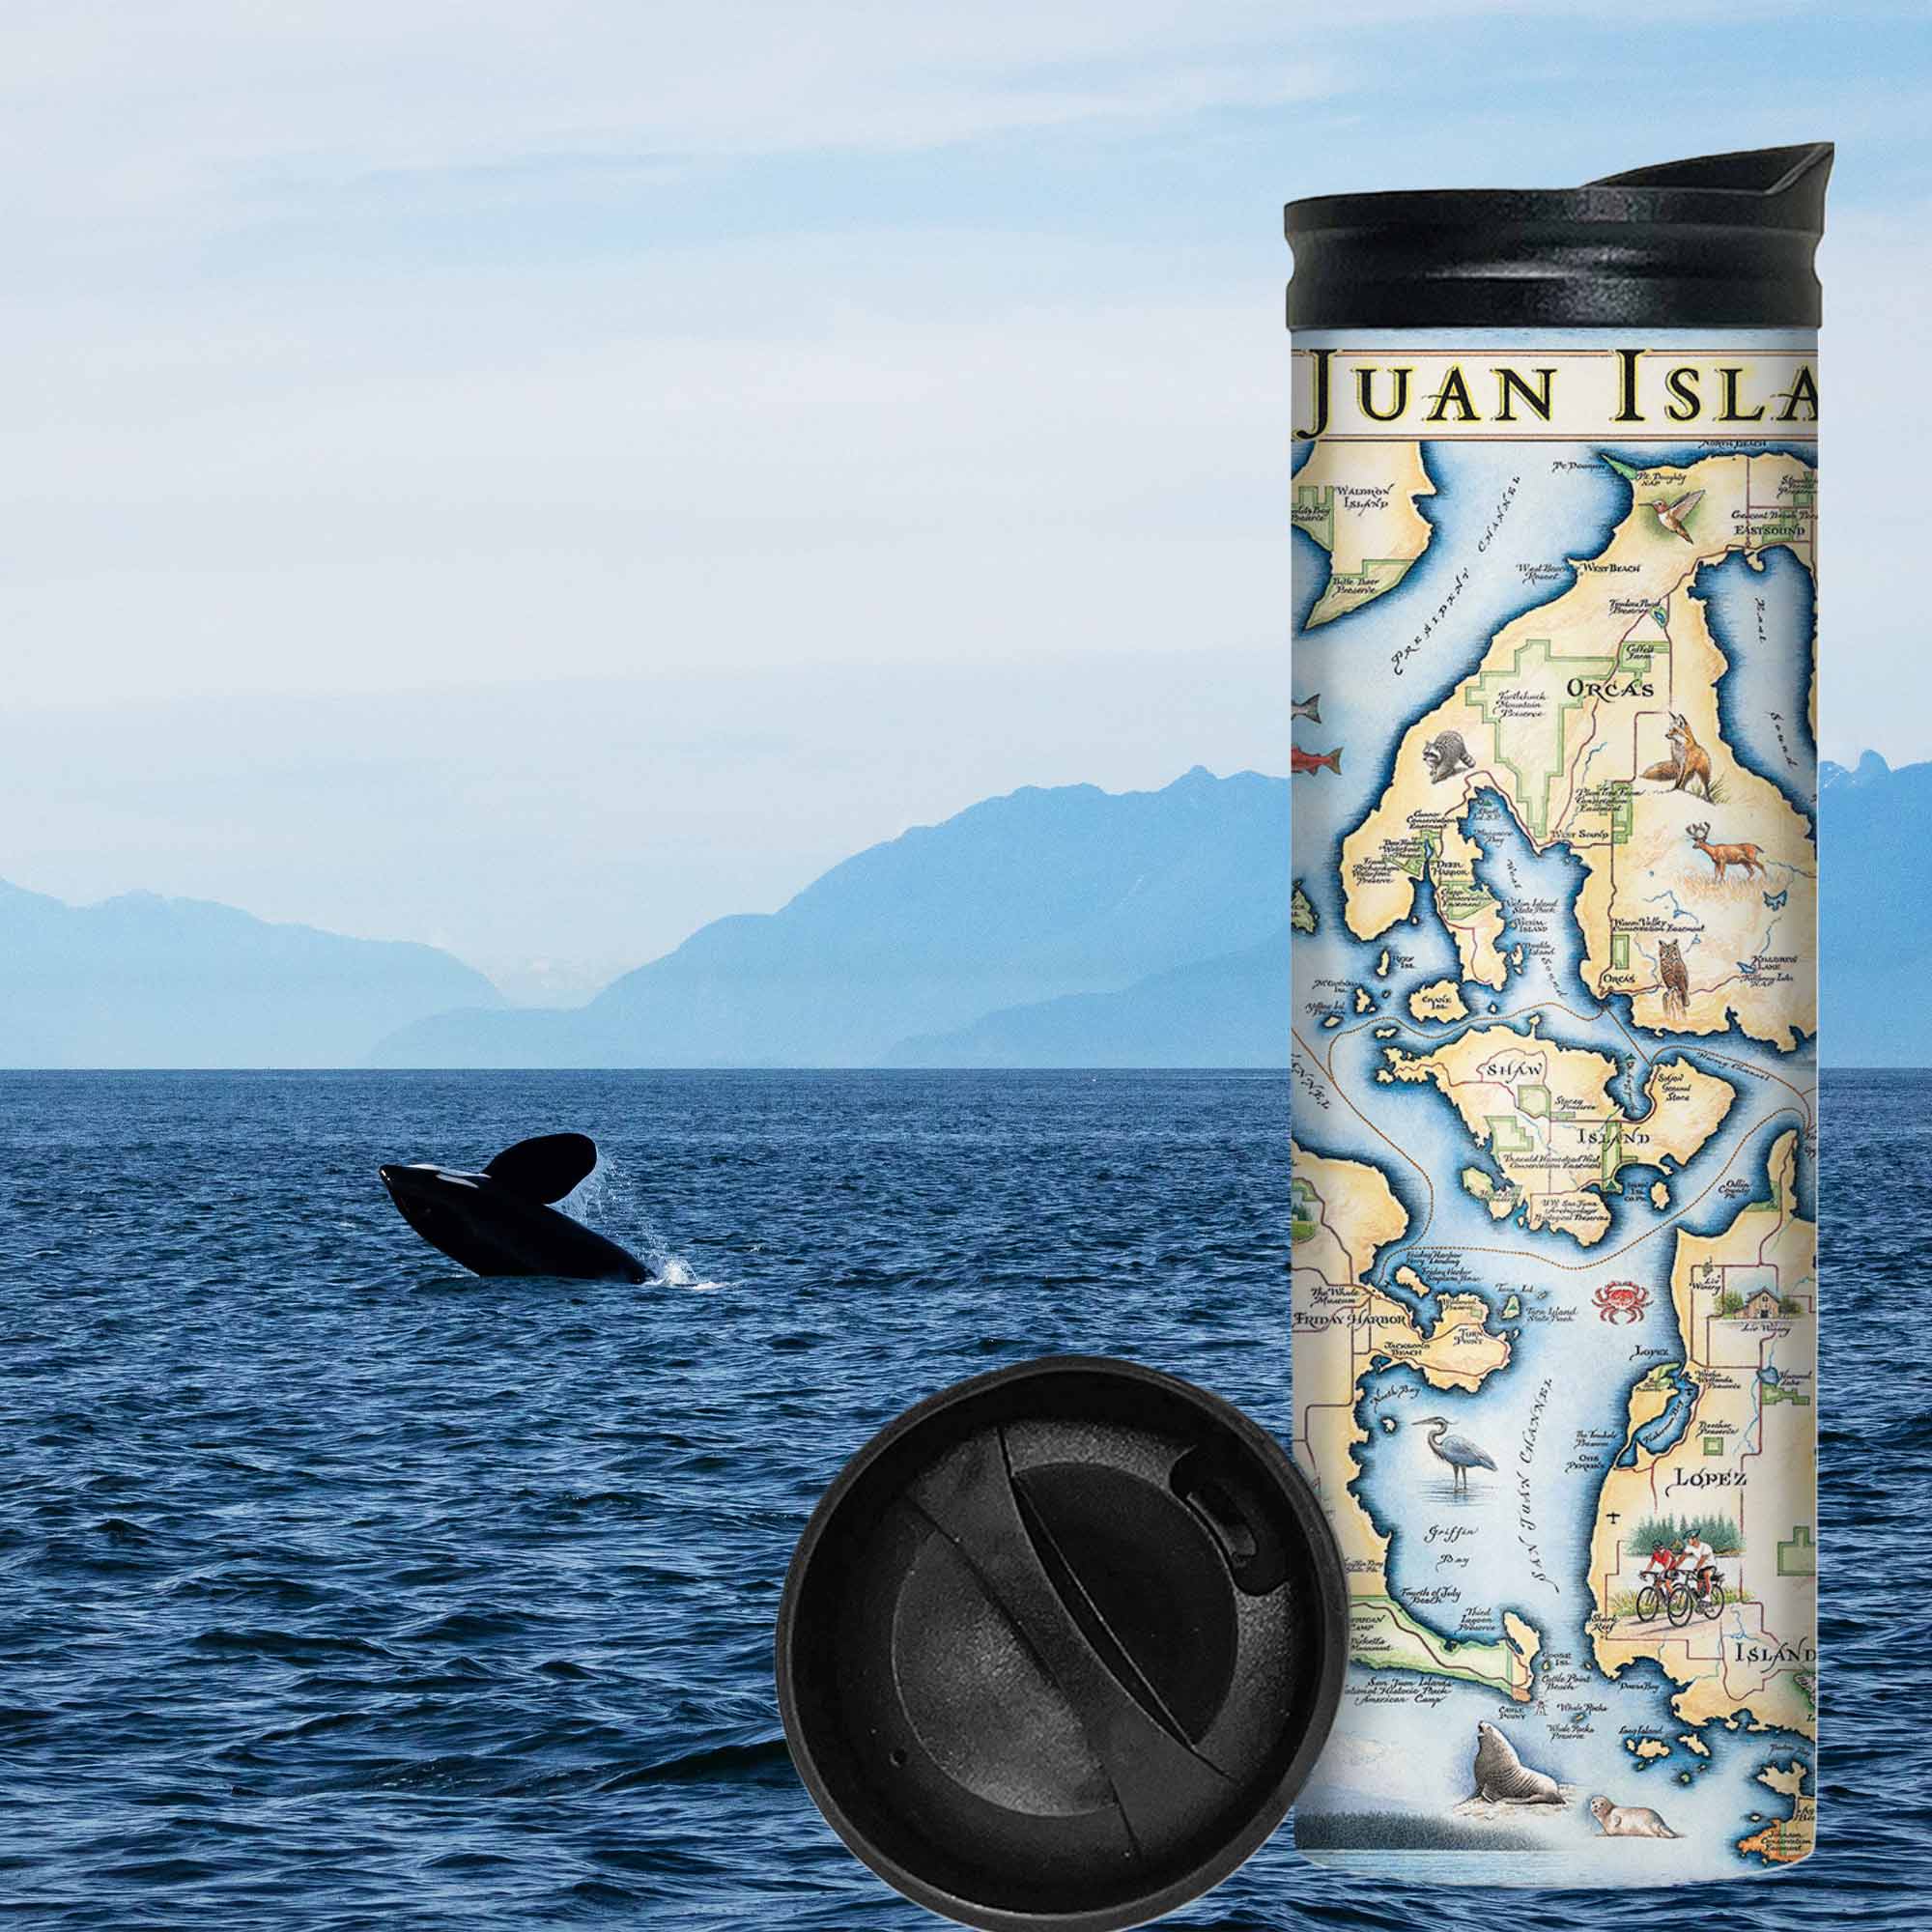 Washington's San Juan Islands Map with a whale in the  Pacific Northwest landscape and ocean. The map features illustrations of places such as San Juan Vineyard, Turtleback Mountain Reserve, Liv Winery, and Roche Harbor. Flora and fauna include Orca Whale, Puffin, Herron, camas flower, and rhododendron.